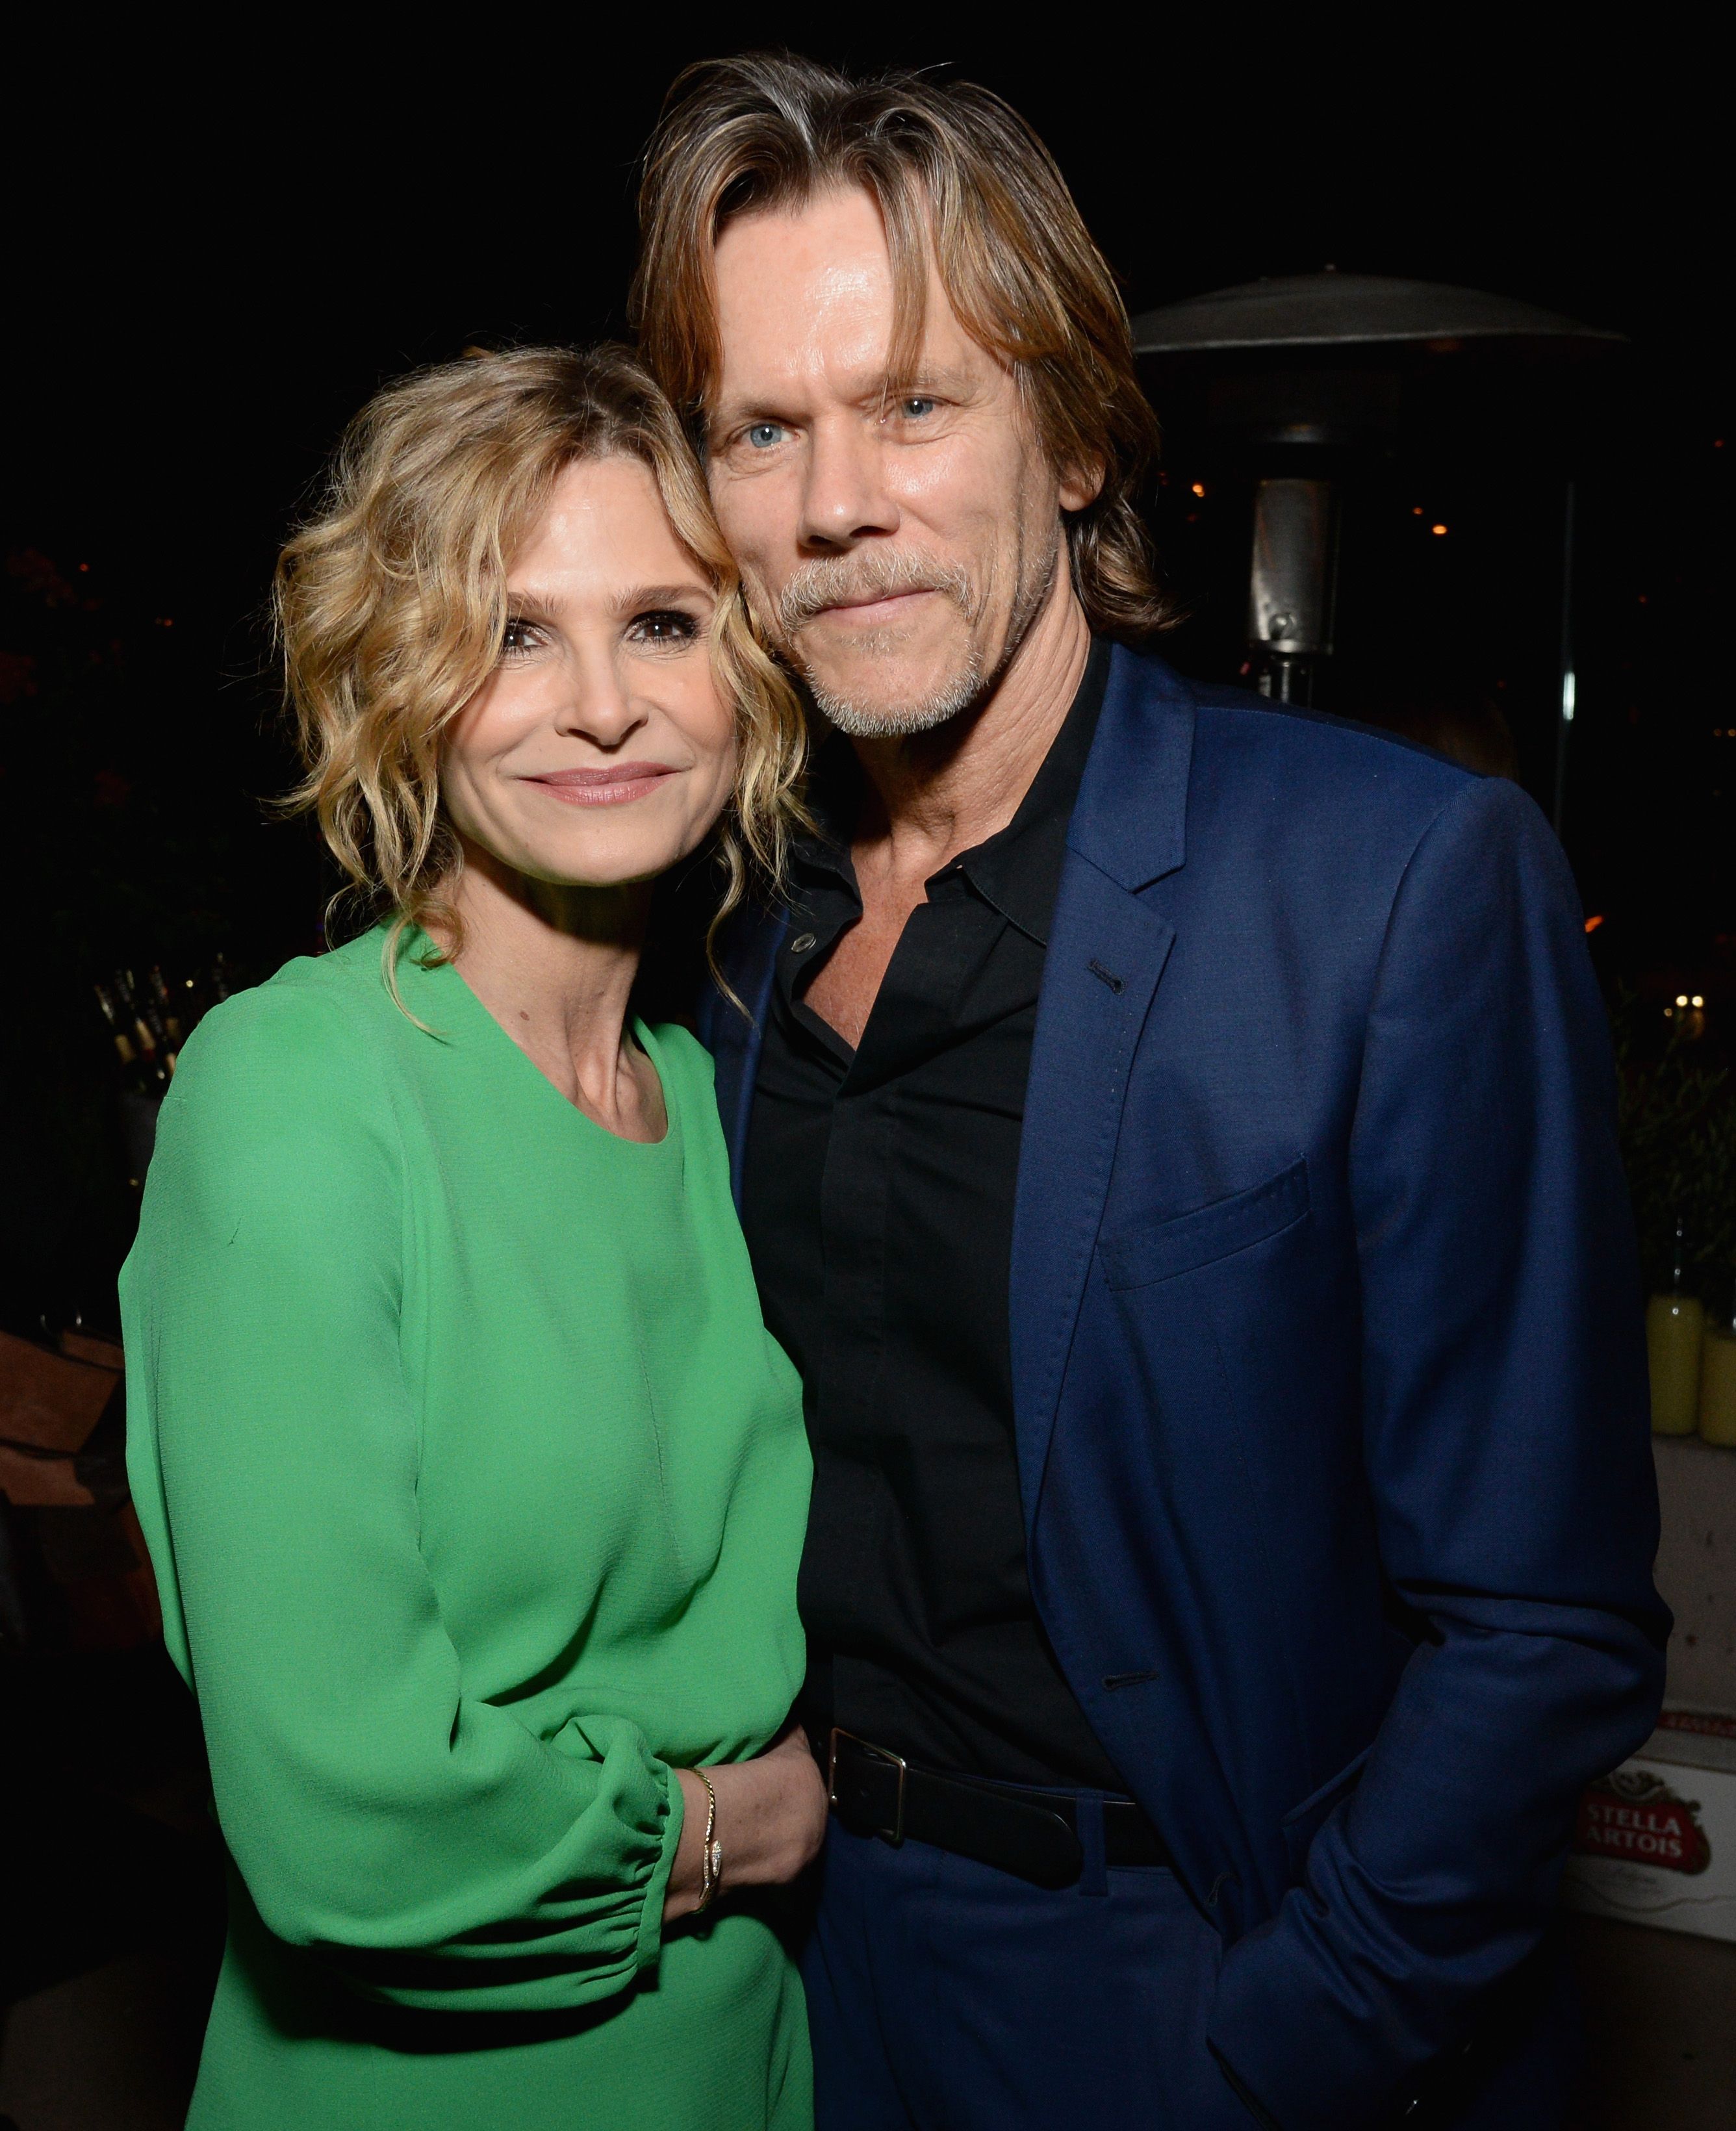 Kyra Sedgwick and Kevin Bacon at Moet Celebrates The 75th Anniversary of The Golden Globes Award Season at Catch LA on November 15, 2017 | Photo: Getty Images